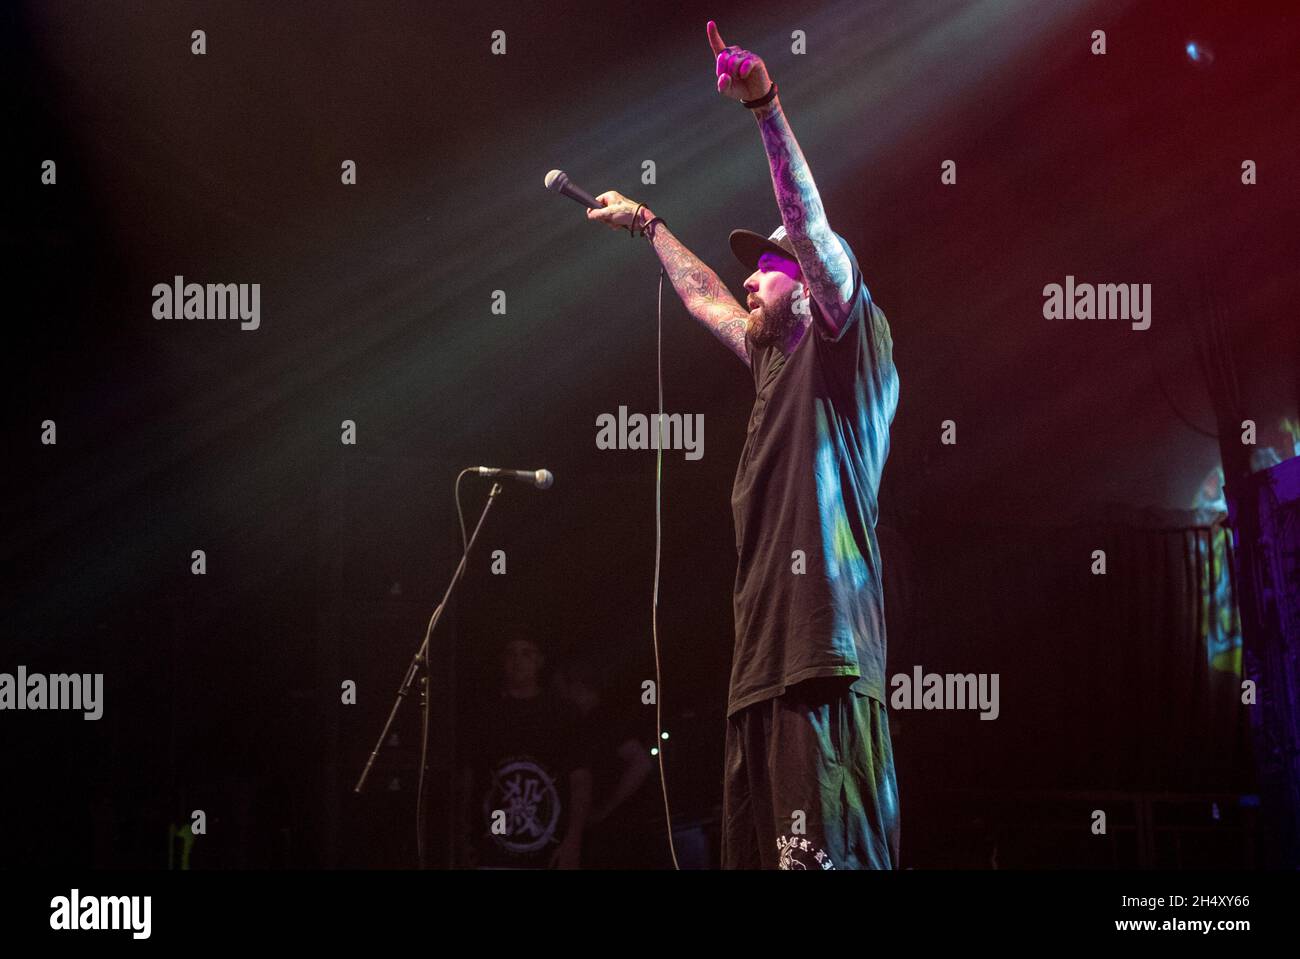 JJ Peters of Deez Nuts performing live on stage during IMPERICON Festival at 02 Academy on May 04, 2015 in Manchester, United Kingdom Stock Photo